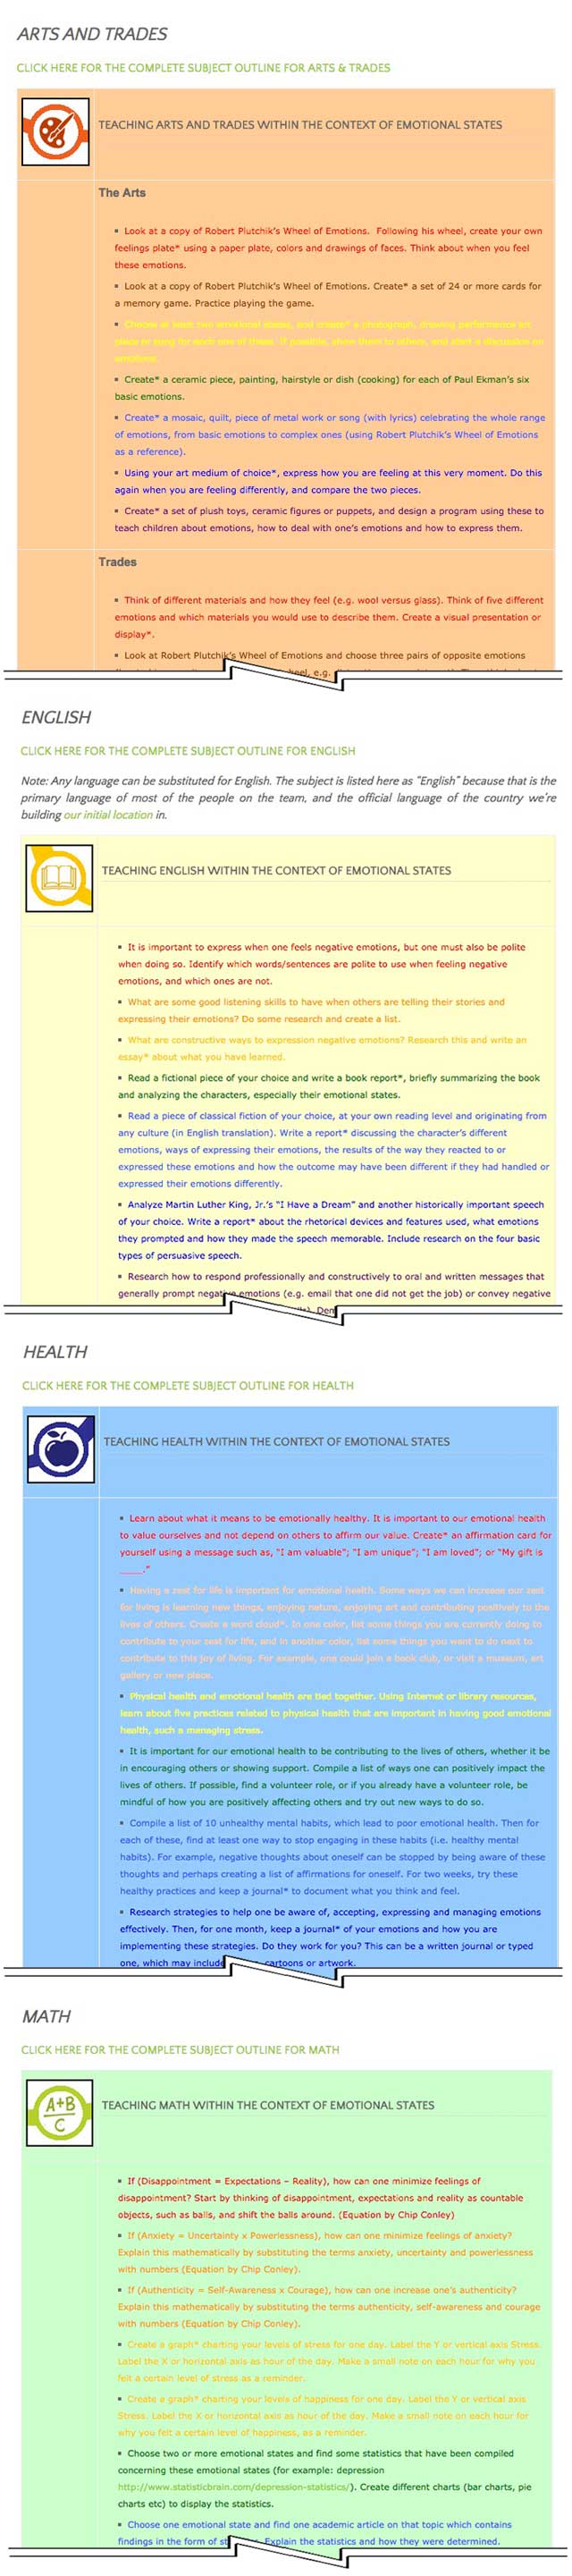 This last week the core team transferred the first 50% of the written content for the Emotional States Lesson Plan to the website, as you see here. The written part of this lesson plan is purposed to teach all subjects, to all learning levels, in any learning environment, using the central theme of "Emotional States".